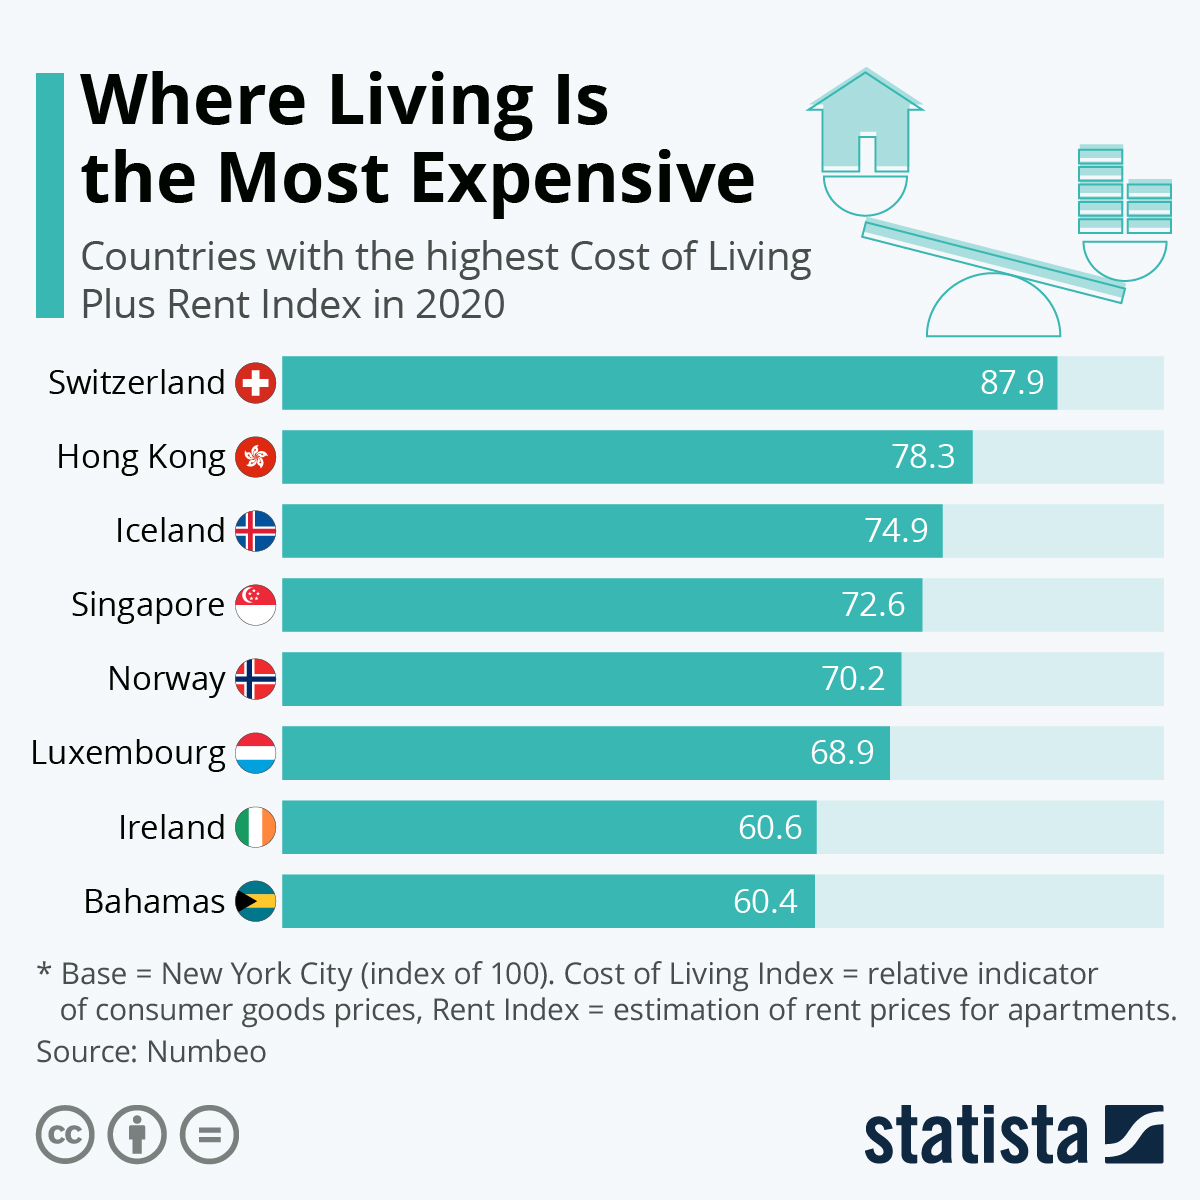 Where Living Is the Most Expensive